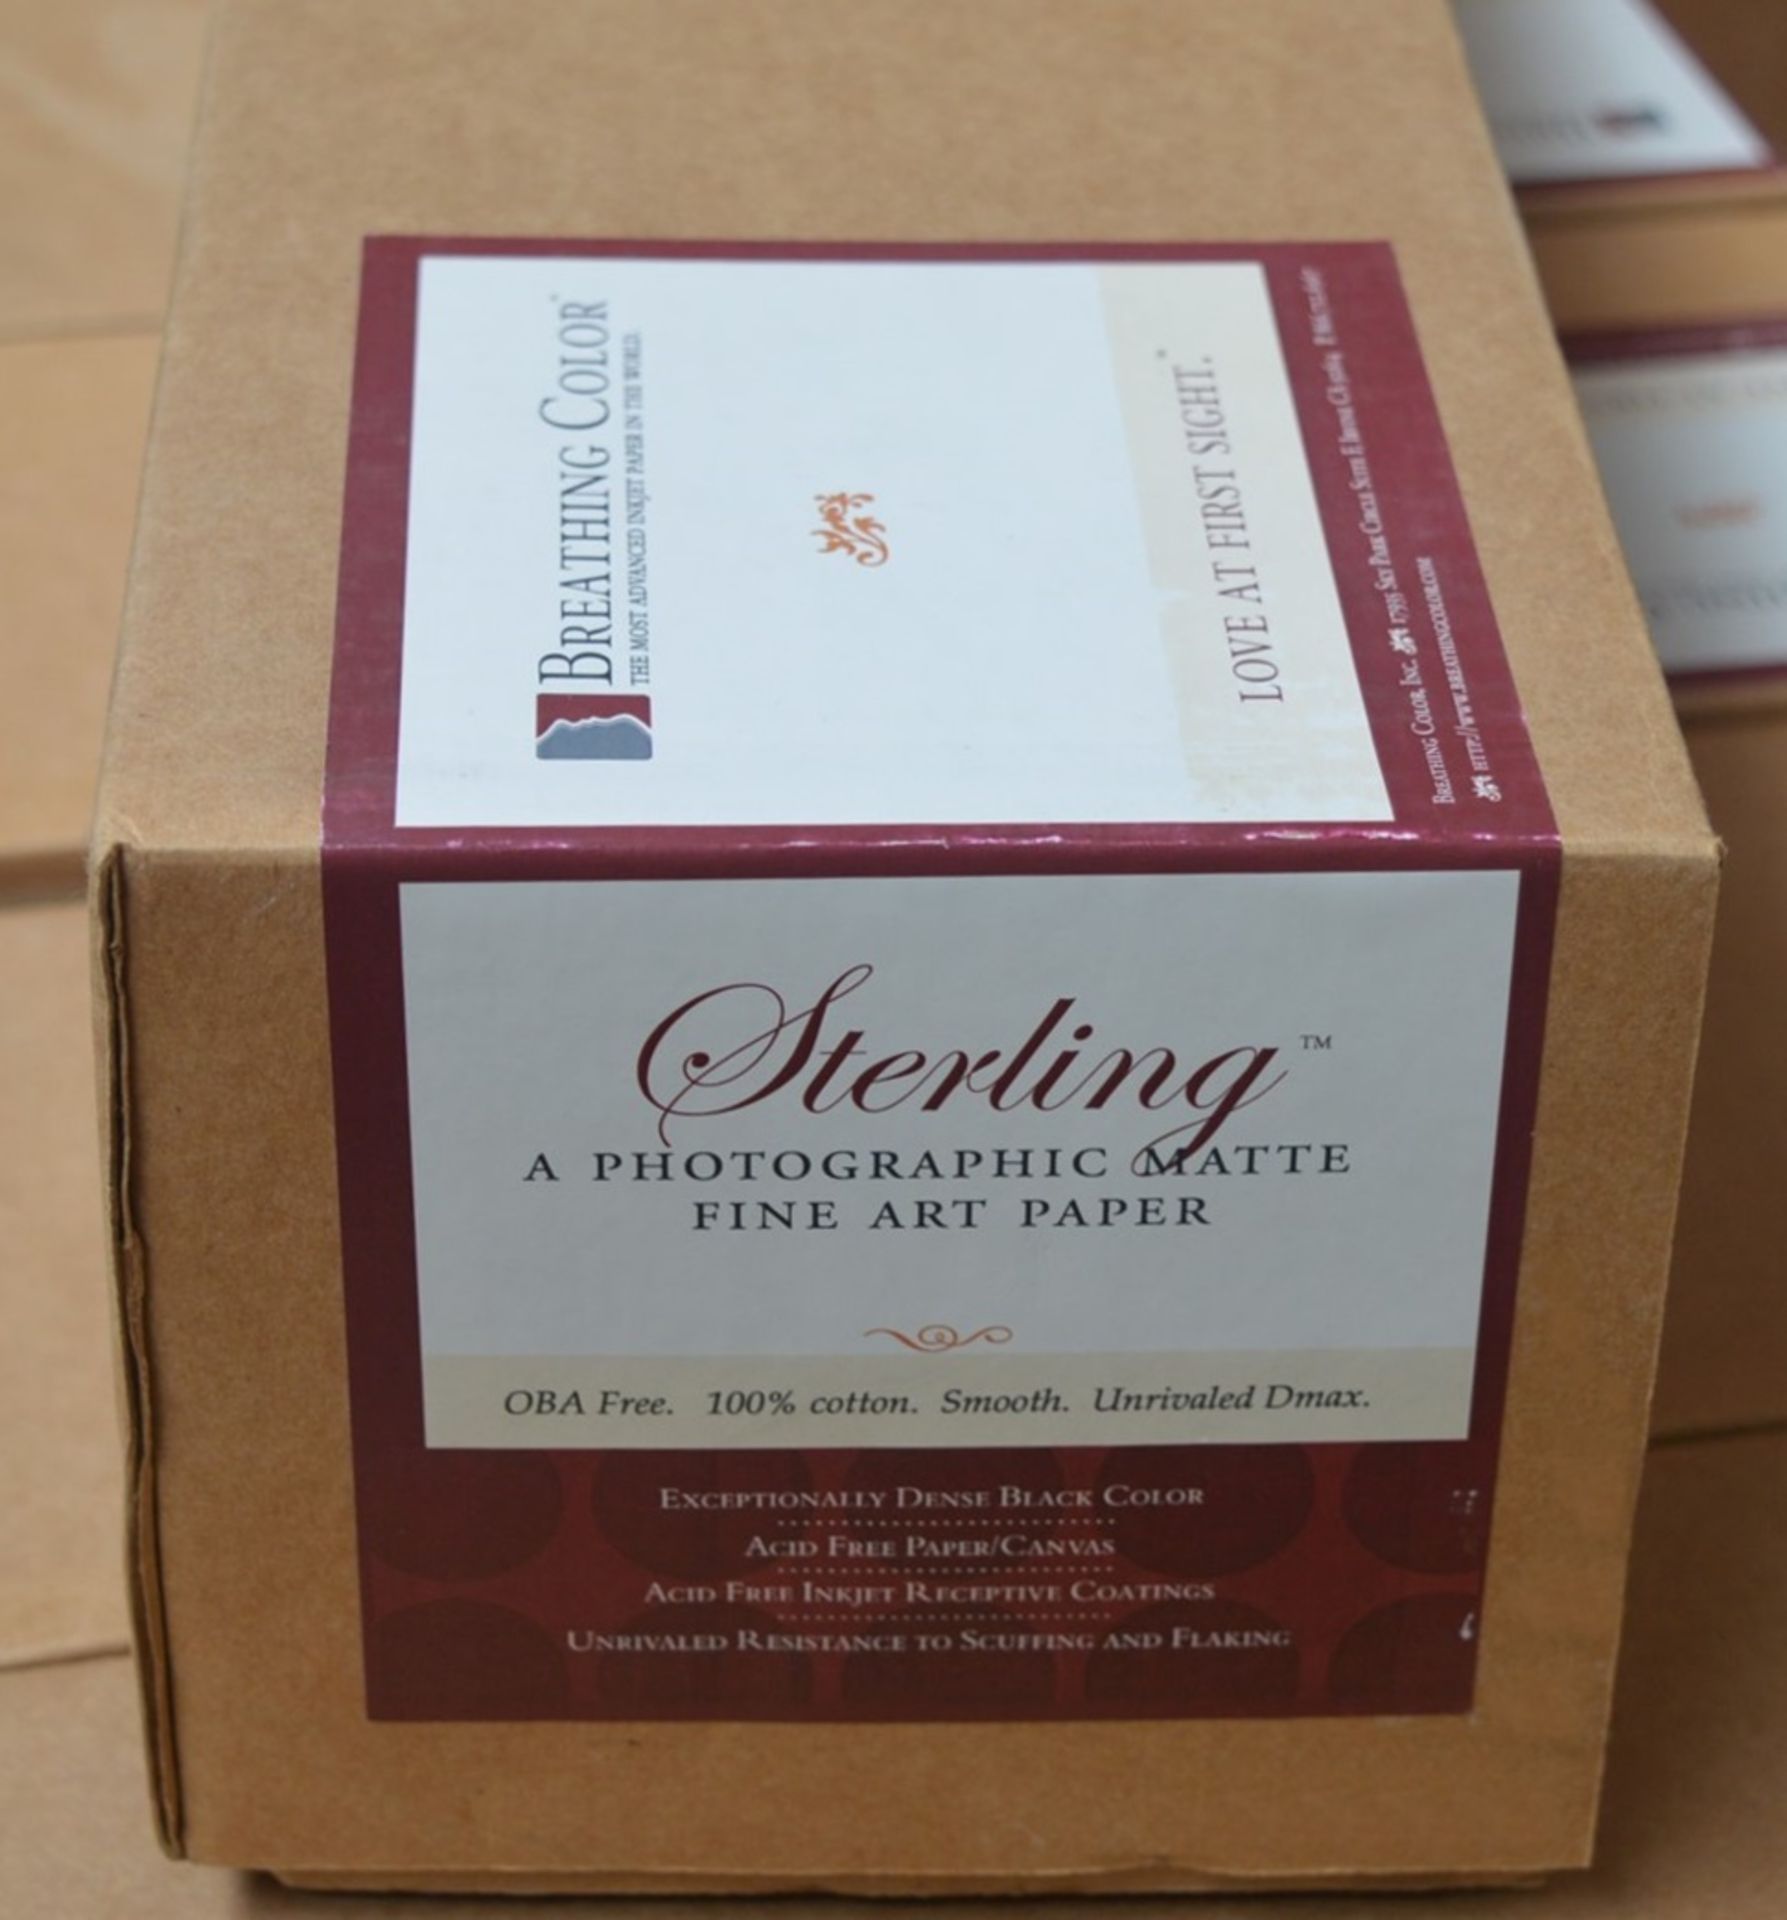 1 x Roll of Breathing Colour STERLING Photographic Matte Fine Art Paper - Size 24" x 50' - 250gsm - - Image 4 of 5